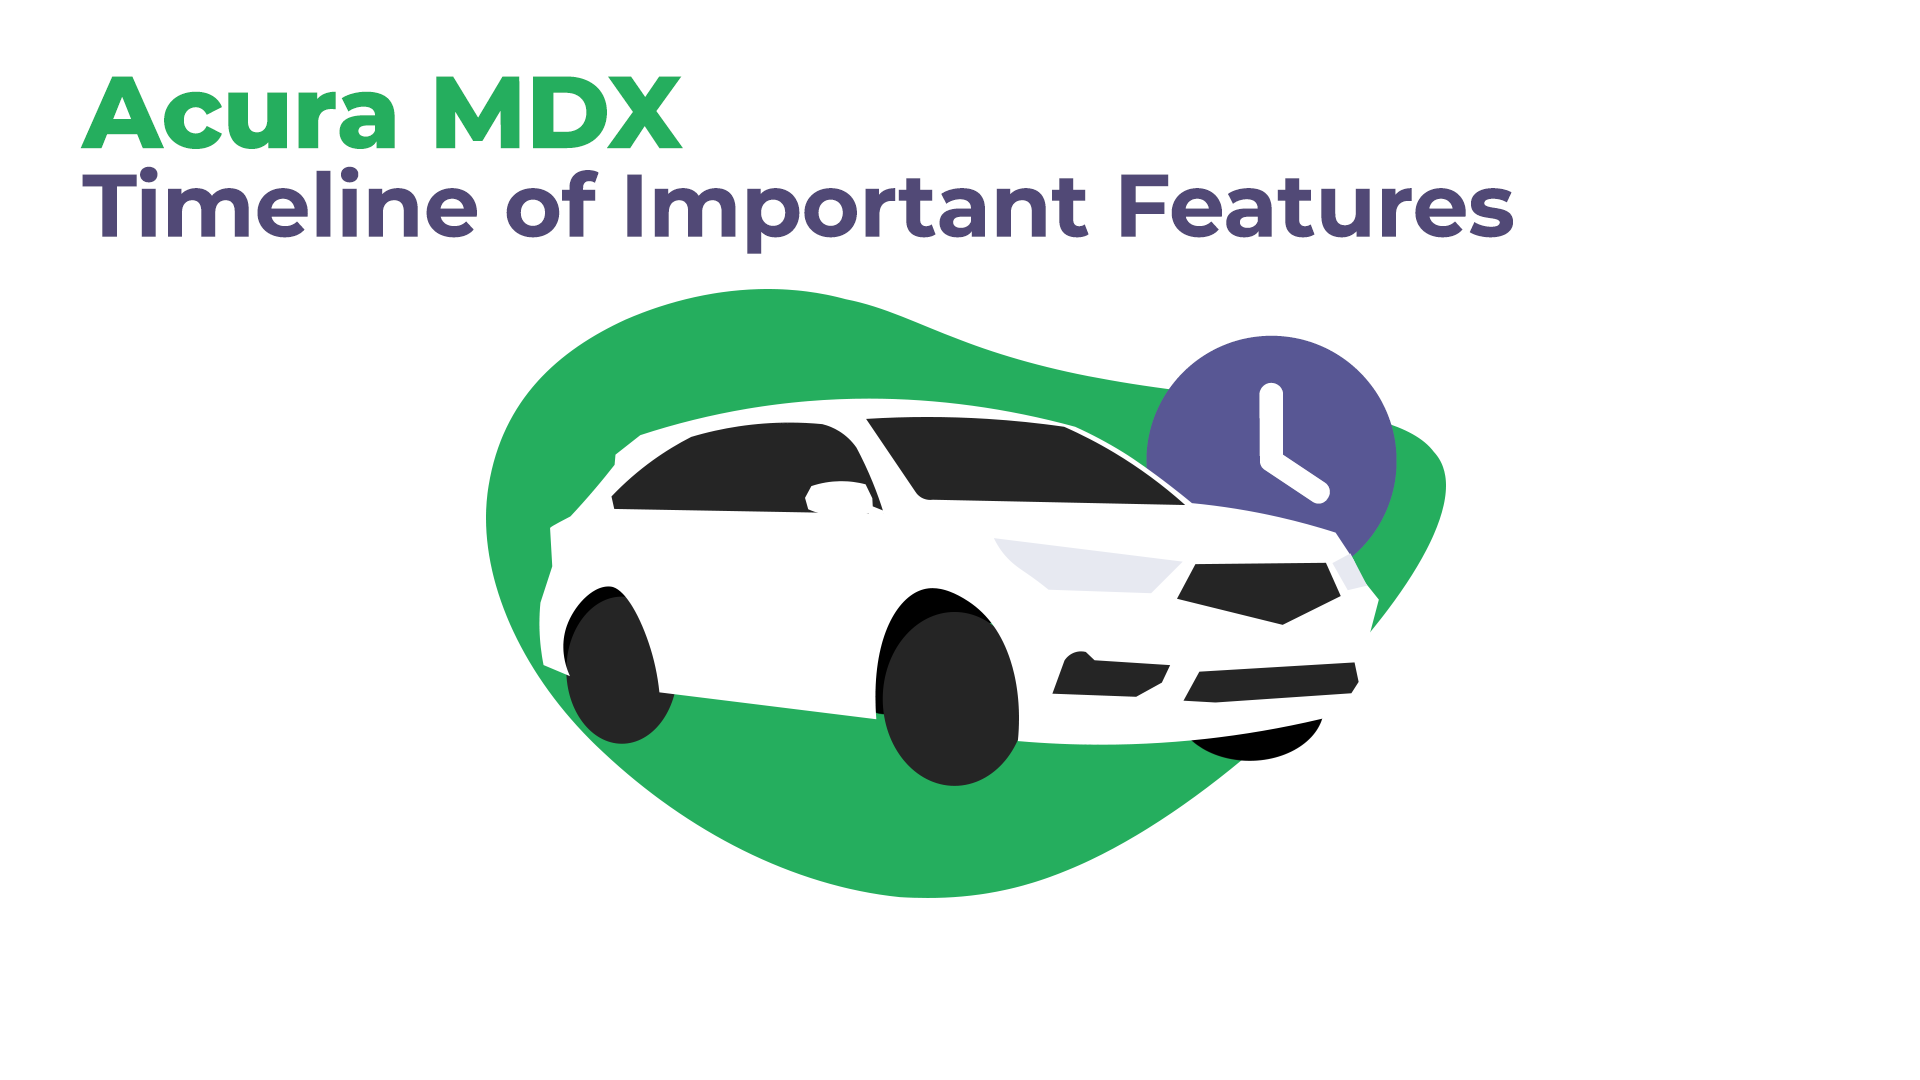 Acura MDX's Timeline of Important Features